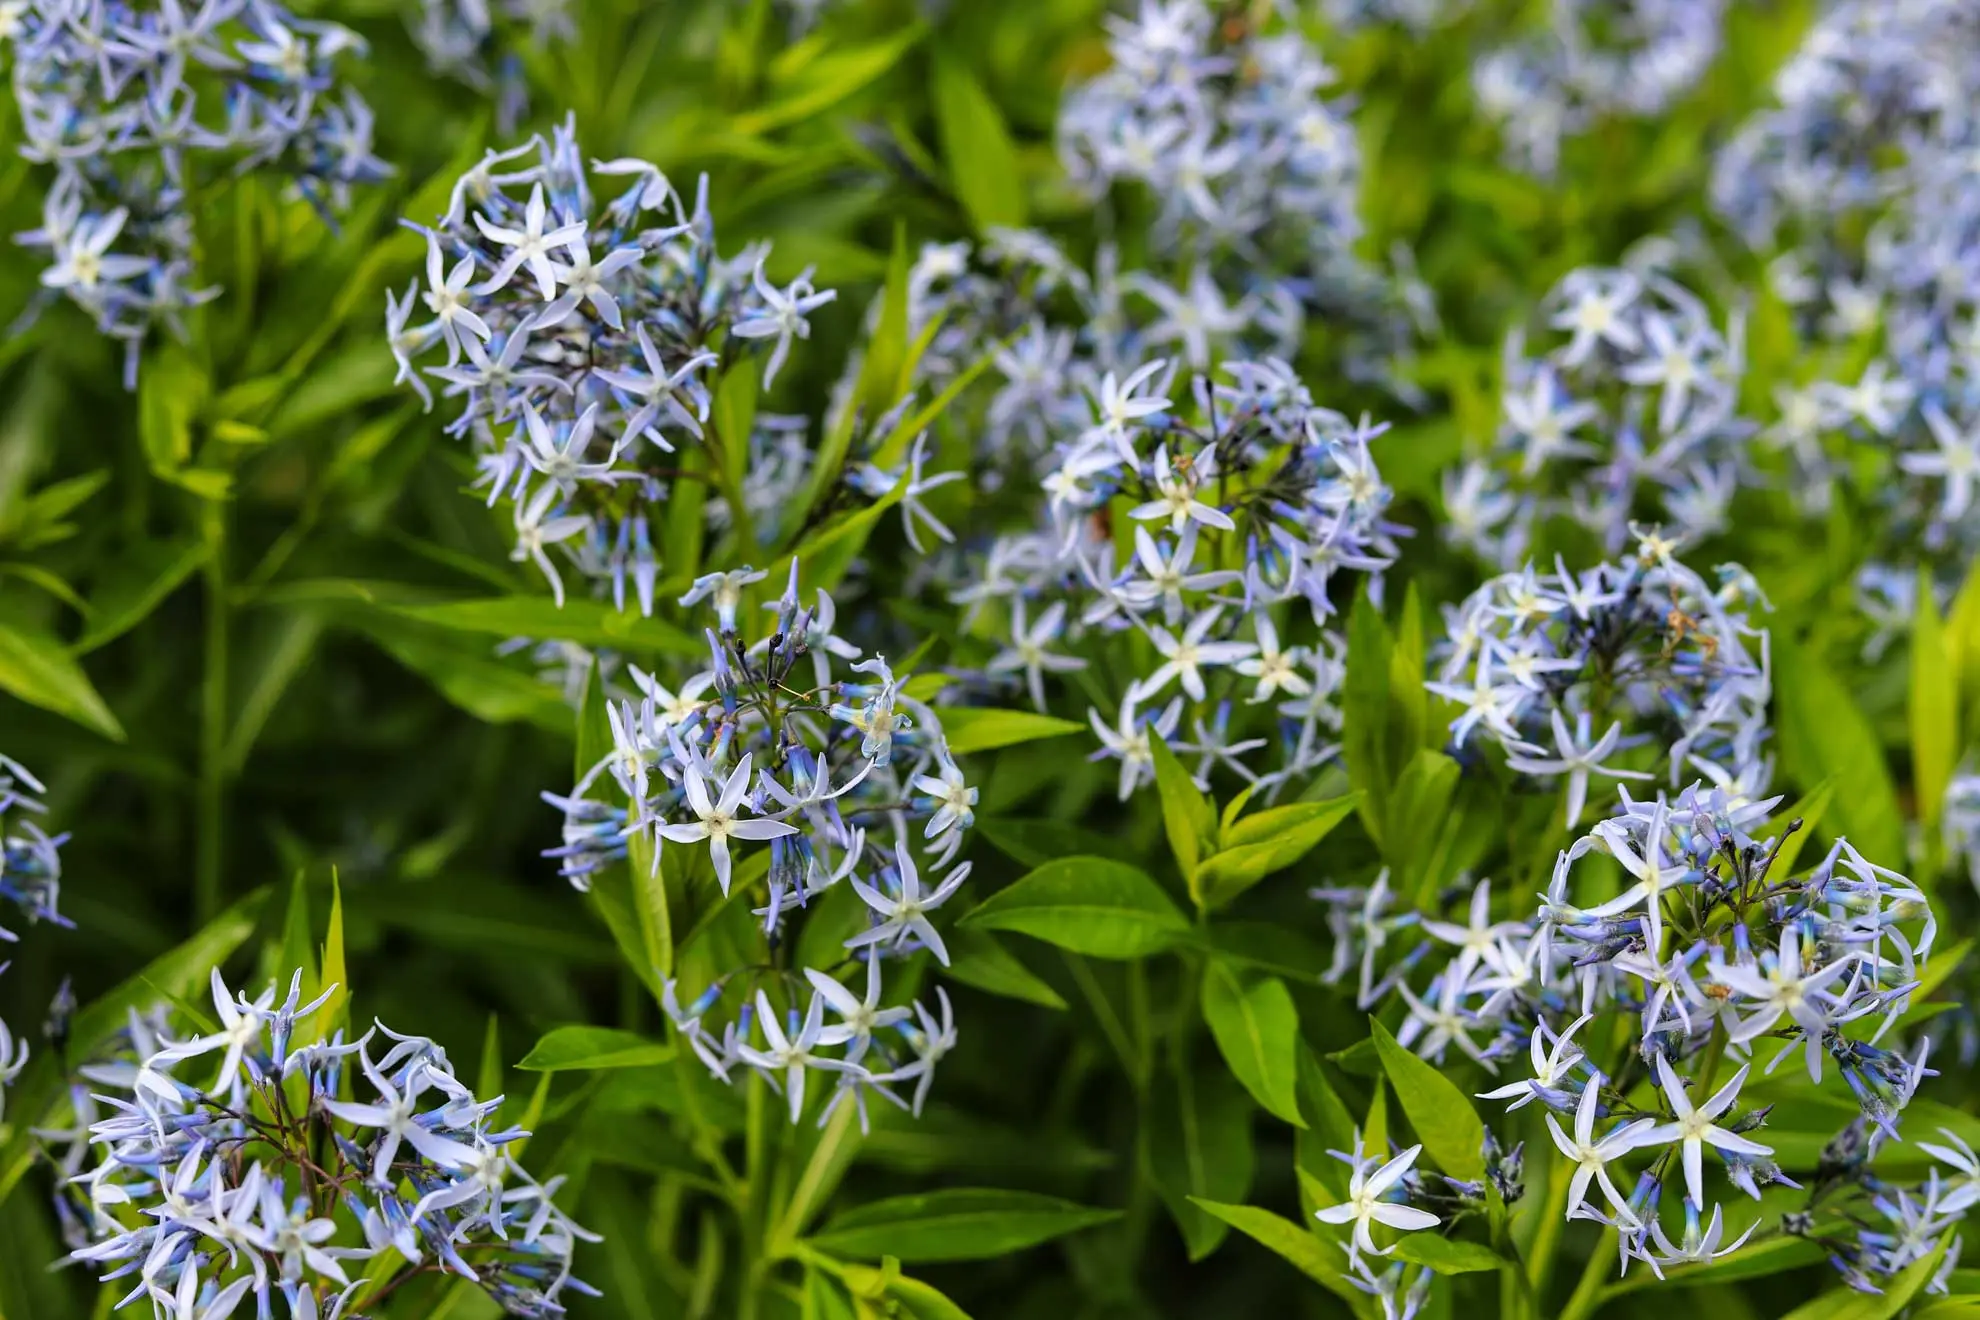 A photograph of several native Amsonia flowers in bloom, with their bright green leaves giving contrast to the blue flowers.